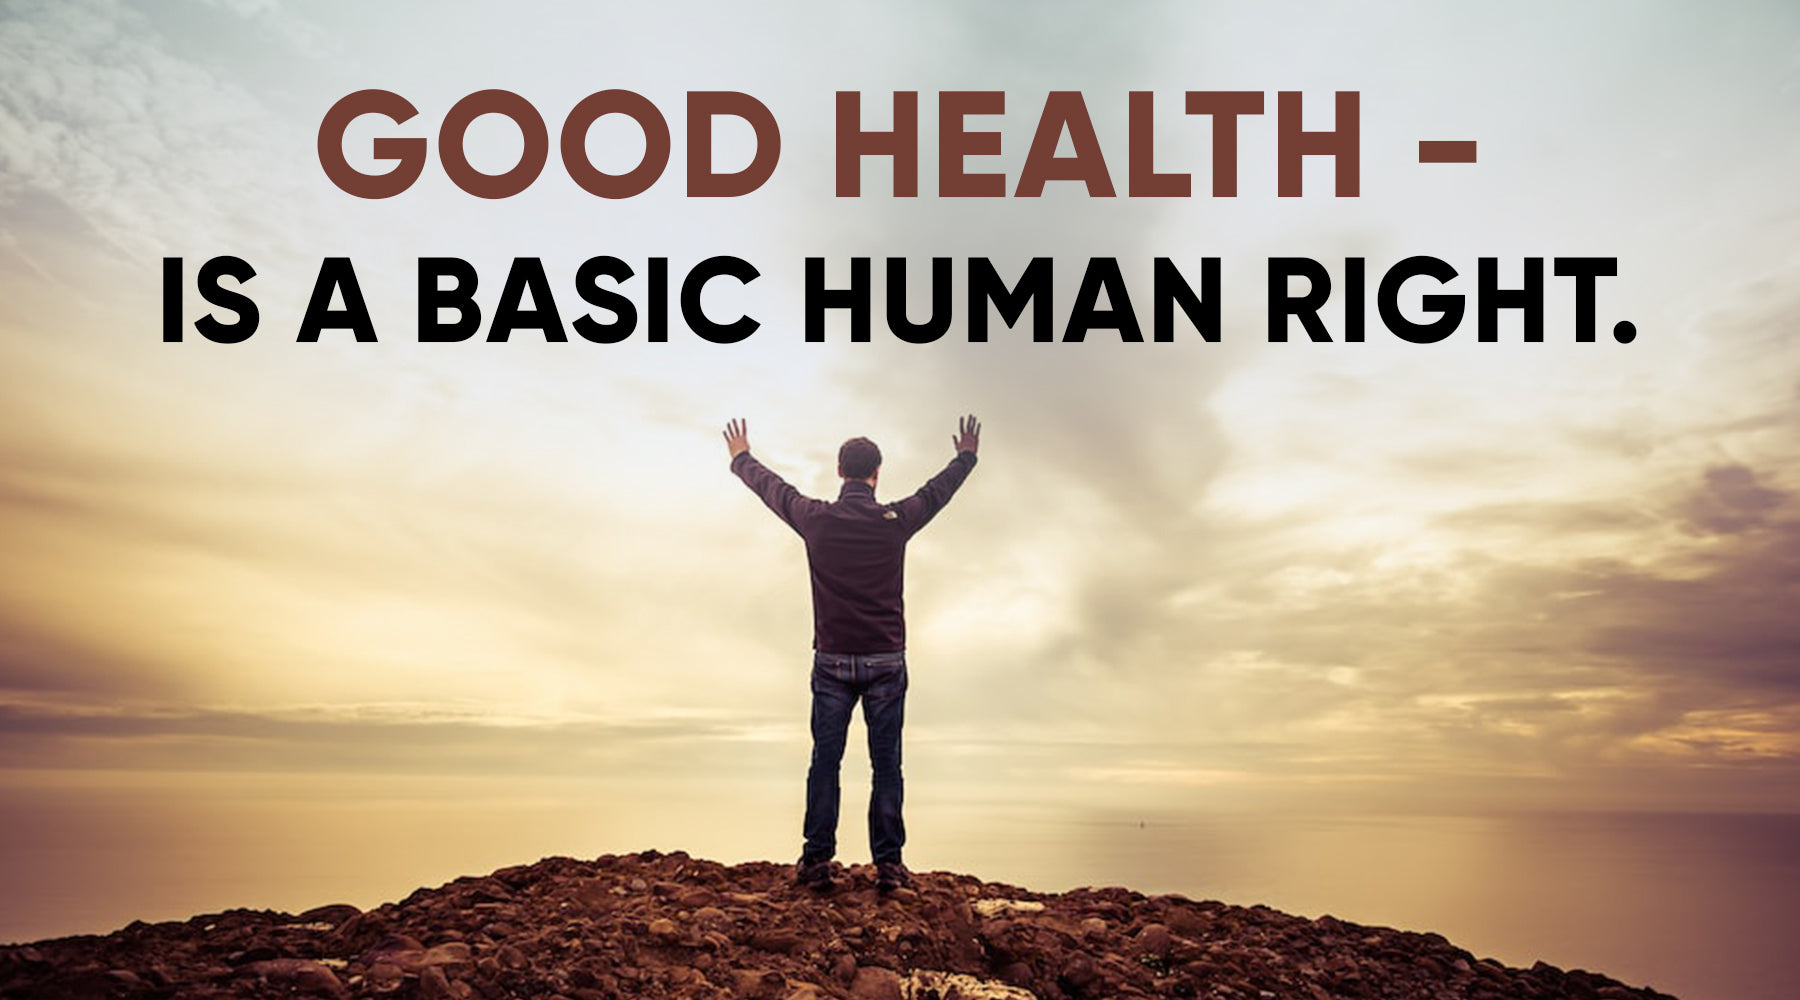 GOOD HEALTH - IS A BASIC HUMAN RIGHT